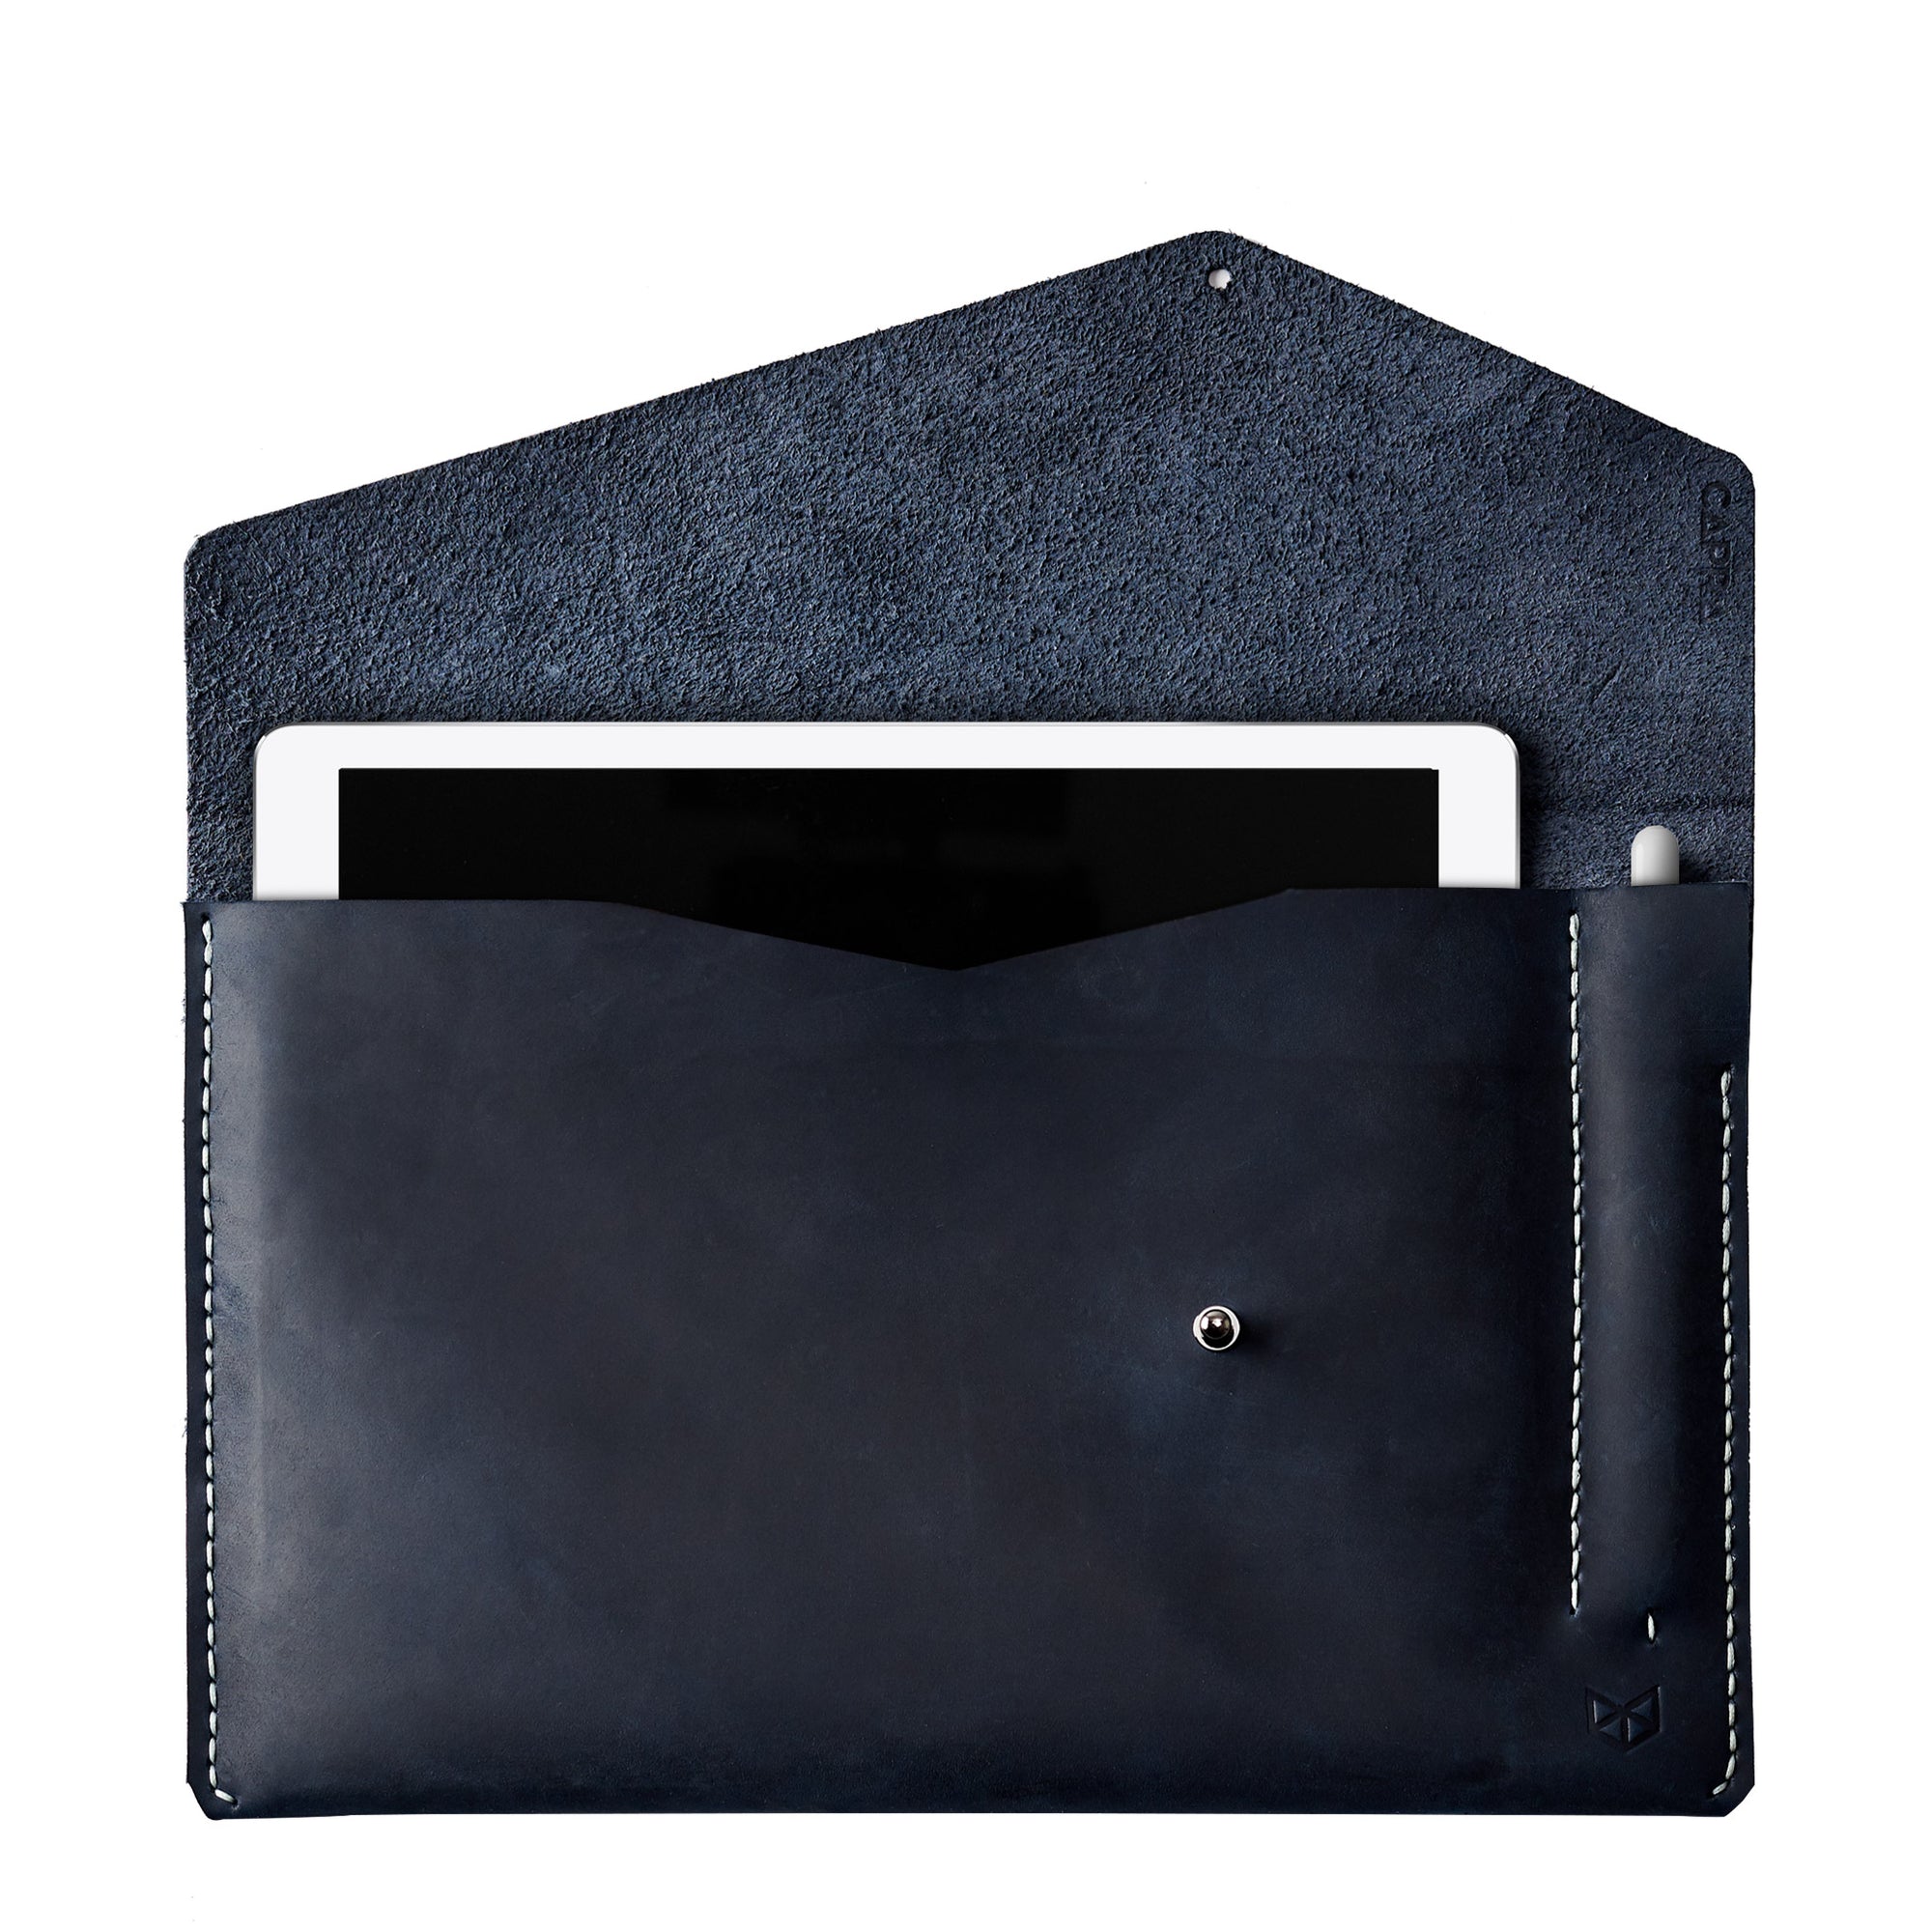 Style front view. Blue draftsman 5 case by Capra Leather. Microsoft Surface sleeve.